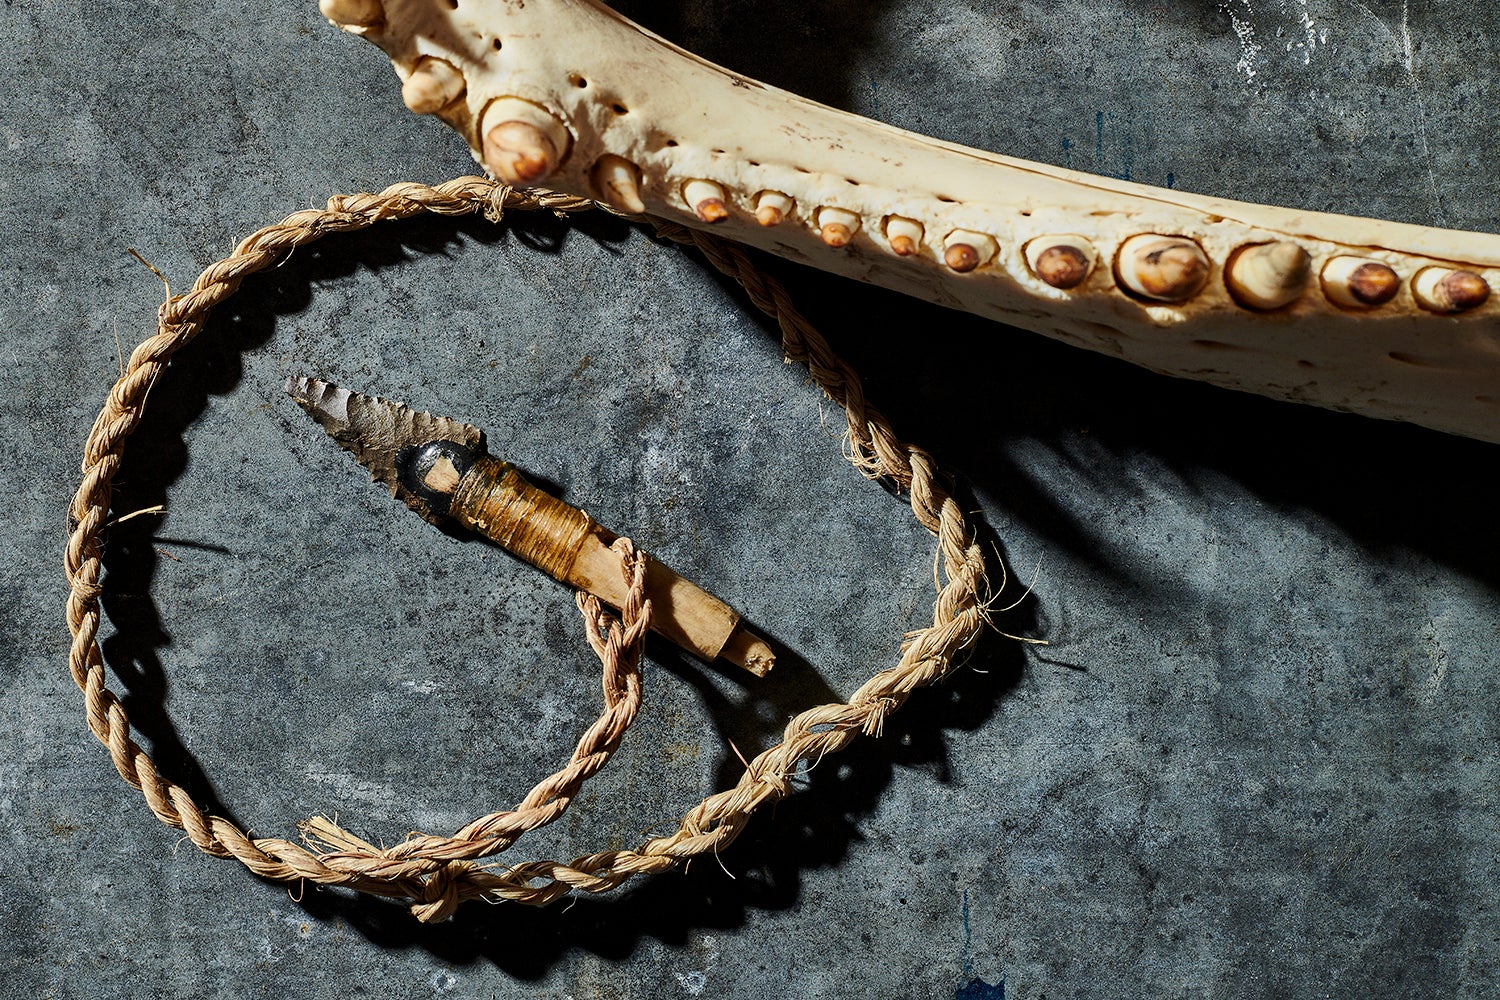 Alligator jaw with handmade spear point